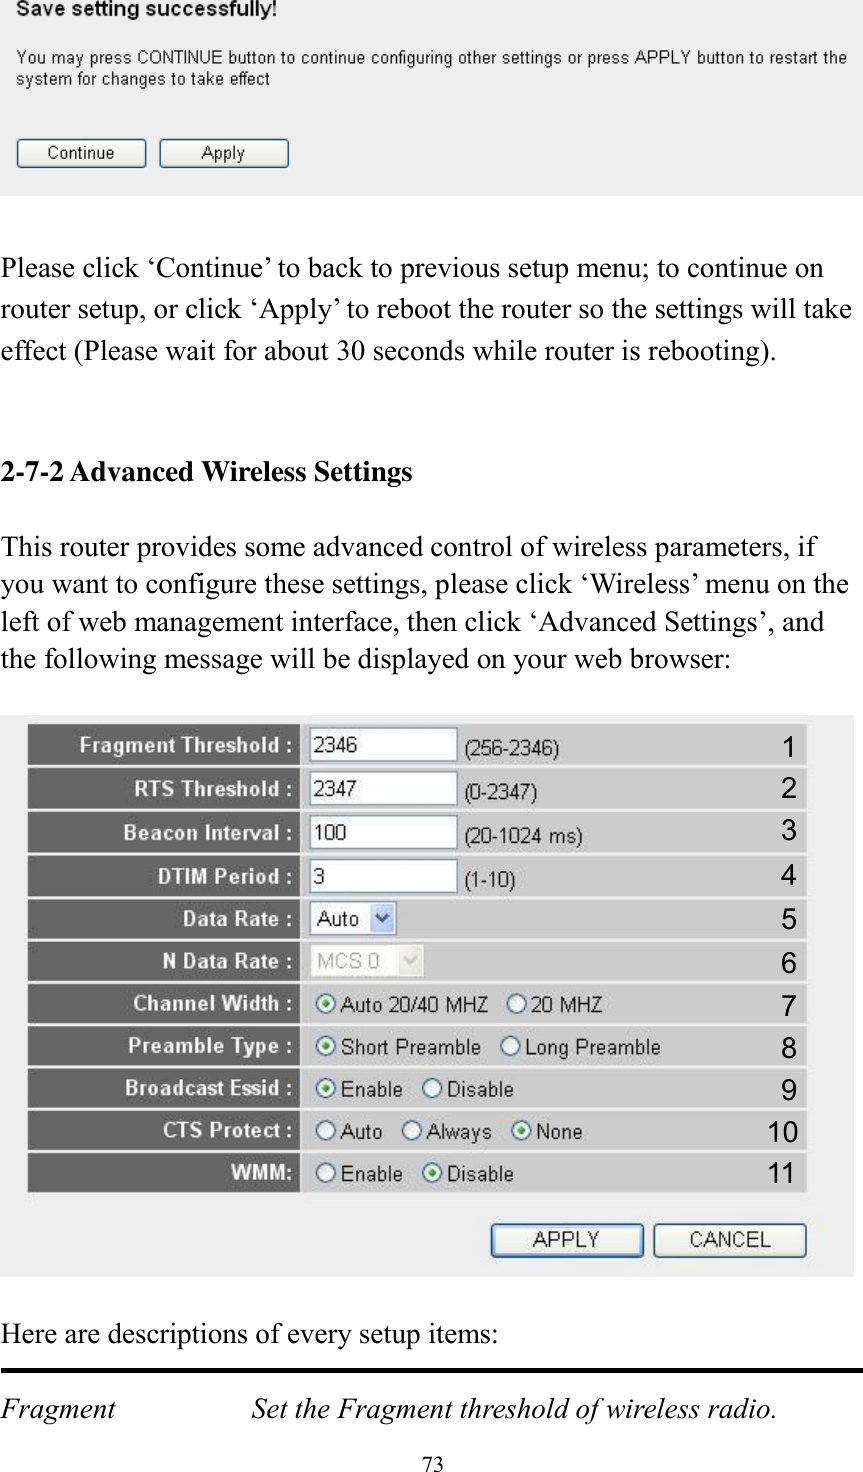 73   Please click ‘Continue’ to back to previous setup menu; to continue on router setup, or click ‘Apply’ to reboot the router so the settings will take effect (Please wait for about 30 seconds while router is rebooting).   2-7-2 Advanced Wireless Settings  This router provides some advanced control of wireless parameters, if you want to configure these settings, please click ‘Wireless’ menu on the left of web management interface, then click ‘Advanced Settings’, and the following message will be displayed on your web browser:    Here are descriptions of every setup items:  Fragment  Set the Fragment threshold of wireless radio.     1 2 3 4 5 7 8 6 9 10 11 